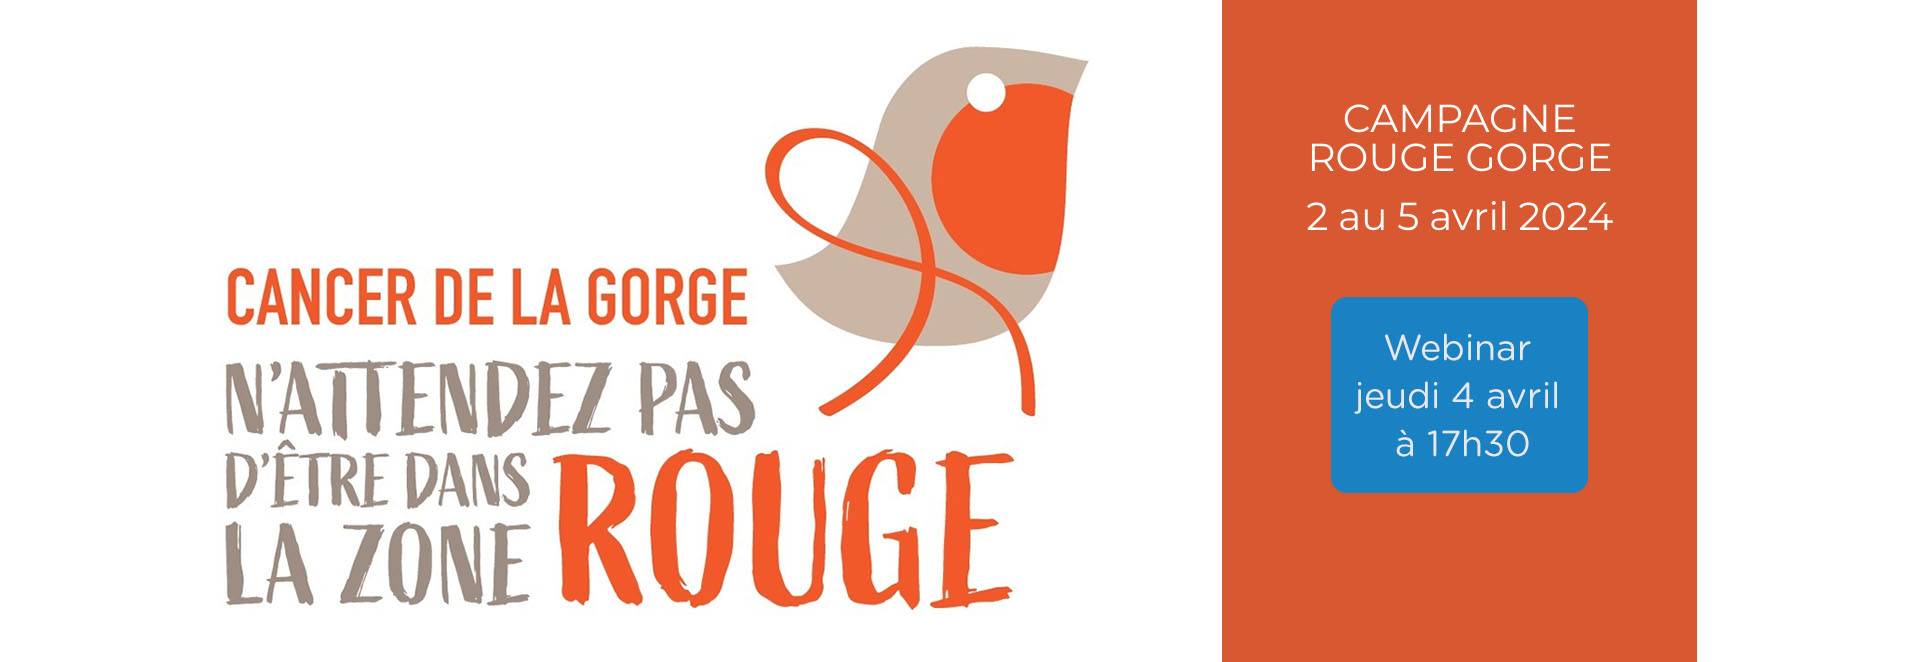 campagne rouge gorge SFORL 2024